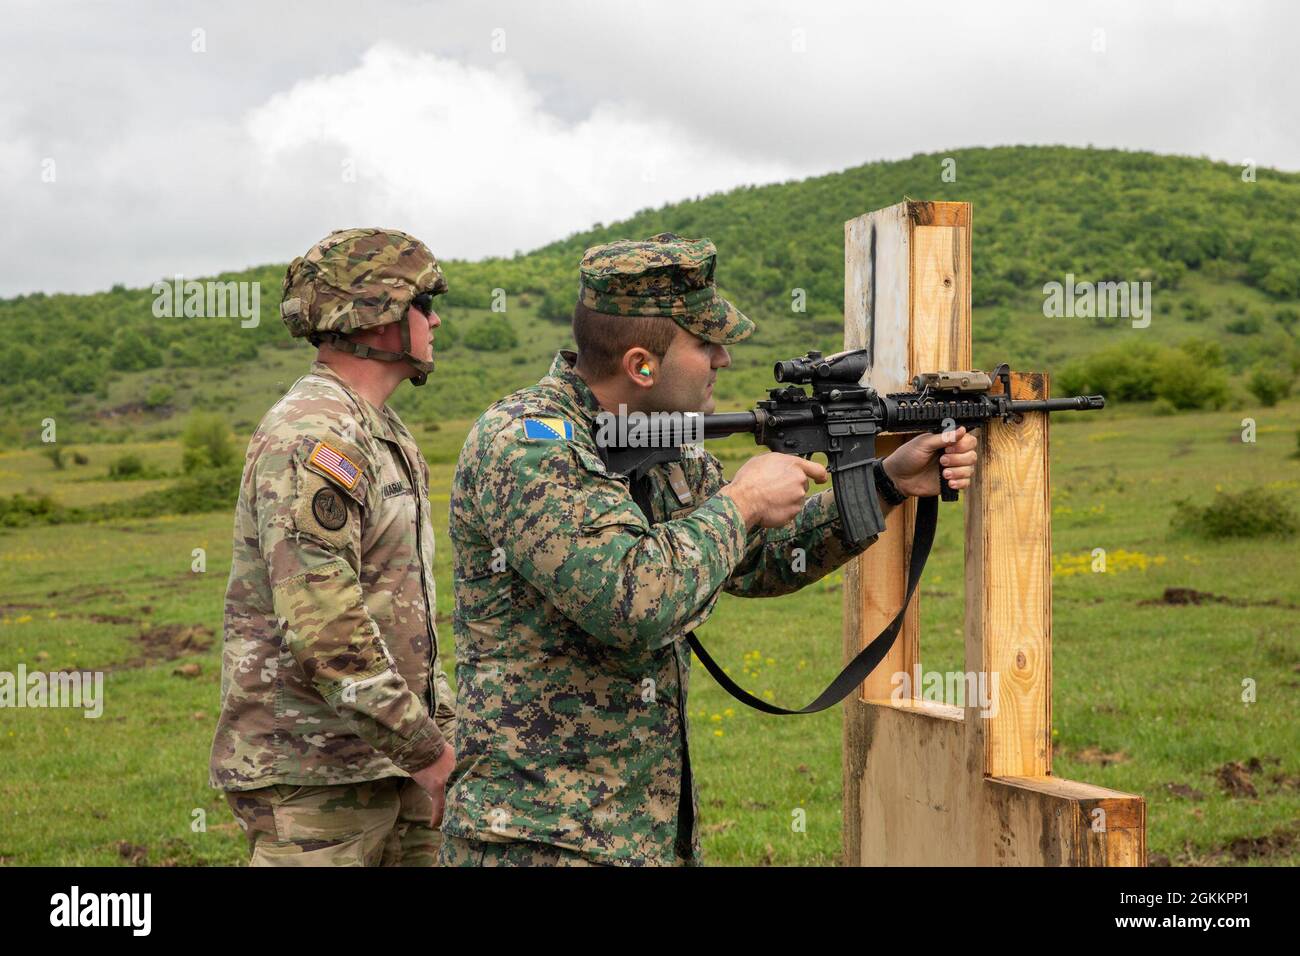 U.S. Army Staff Sgt. Justin Sachariason (left), a Soldier assigned to the Florida Army National Guard’s 2nd Battalion, 124th Infantry Regiment, 53rd Infantry Brigade Combat Team, instructs 1st Lt. Almir Sarač, a Soldier with the Armed Forces of Bosnia and Herzegovina (AFBiH), on how to shoot the M4A1 Carbine rifle at Manjača Training Area, Bosnia and Herzegovina (BiH), May 19, 2021. The 2-124th is in BiH for Immediate Response 21, a training exercise with approximately 500 members of the AFBiH and about 700 U.S. Soldiers working side by side to enhance alliance security while maintaining a bro Stock Photo